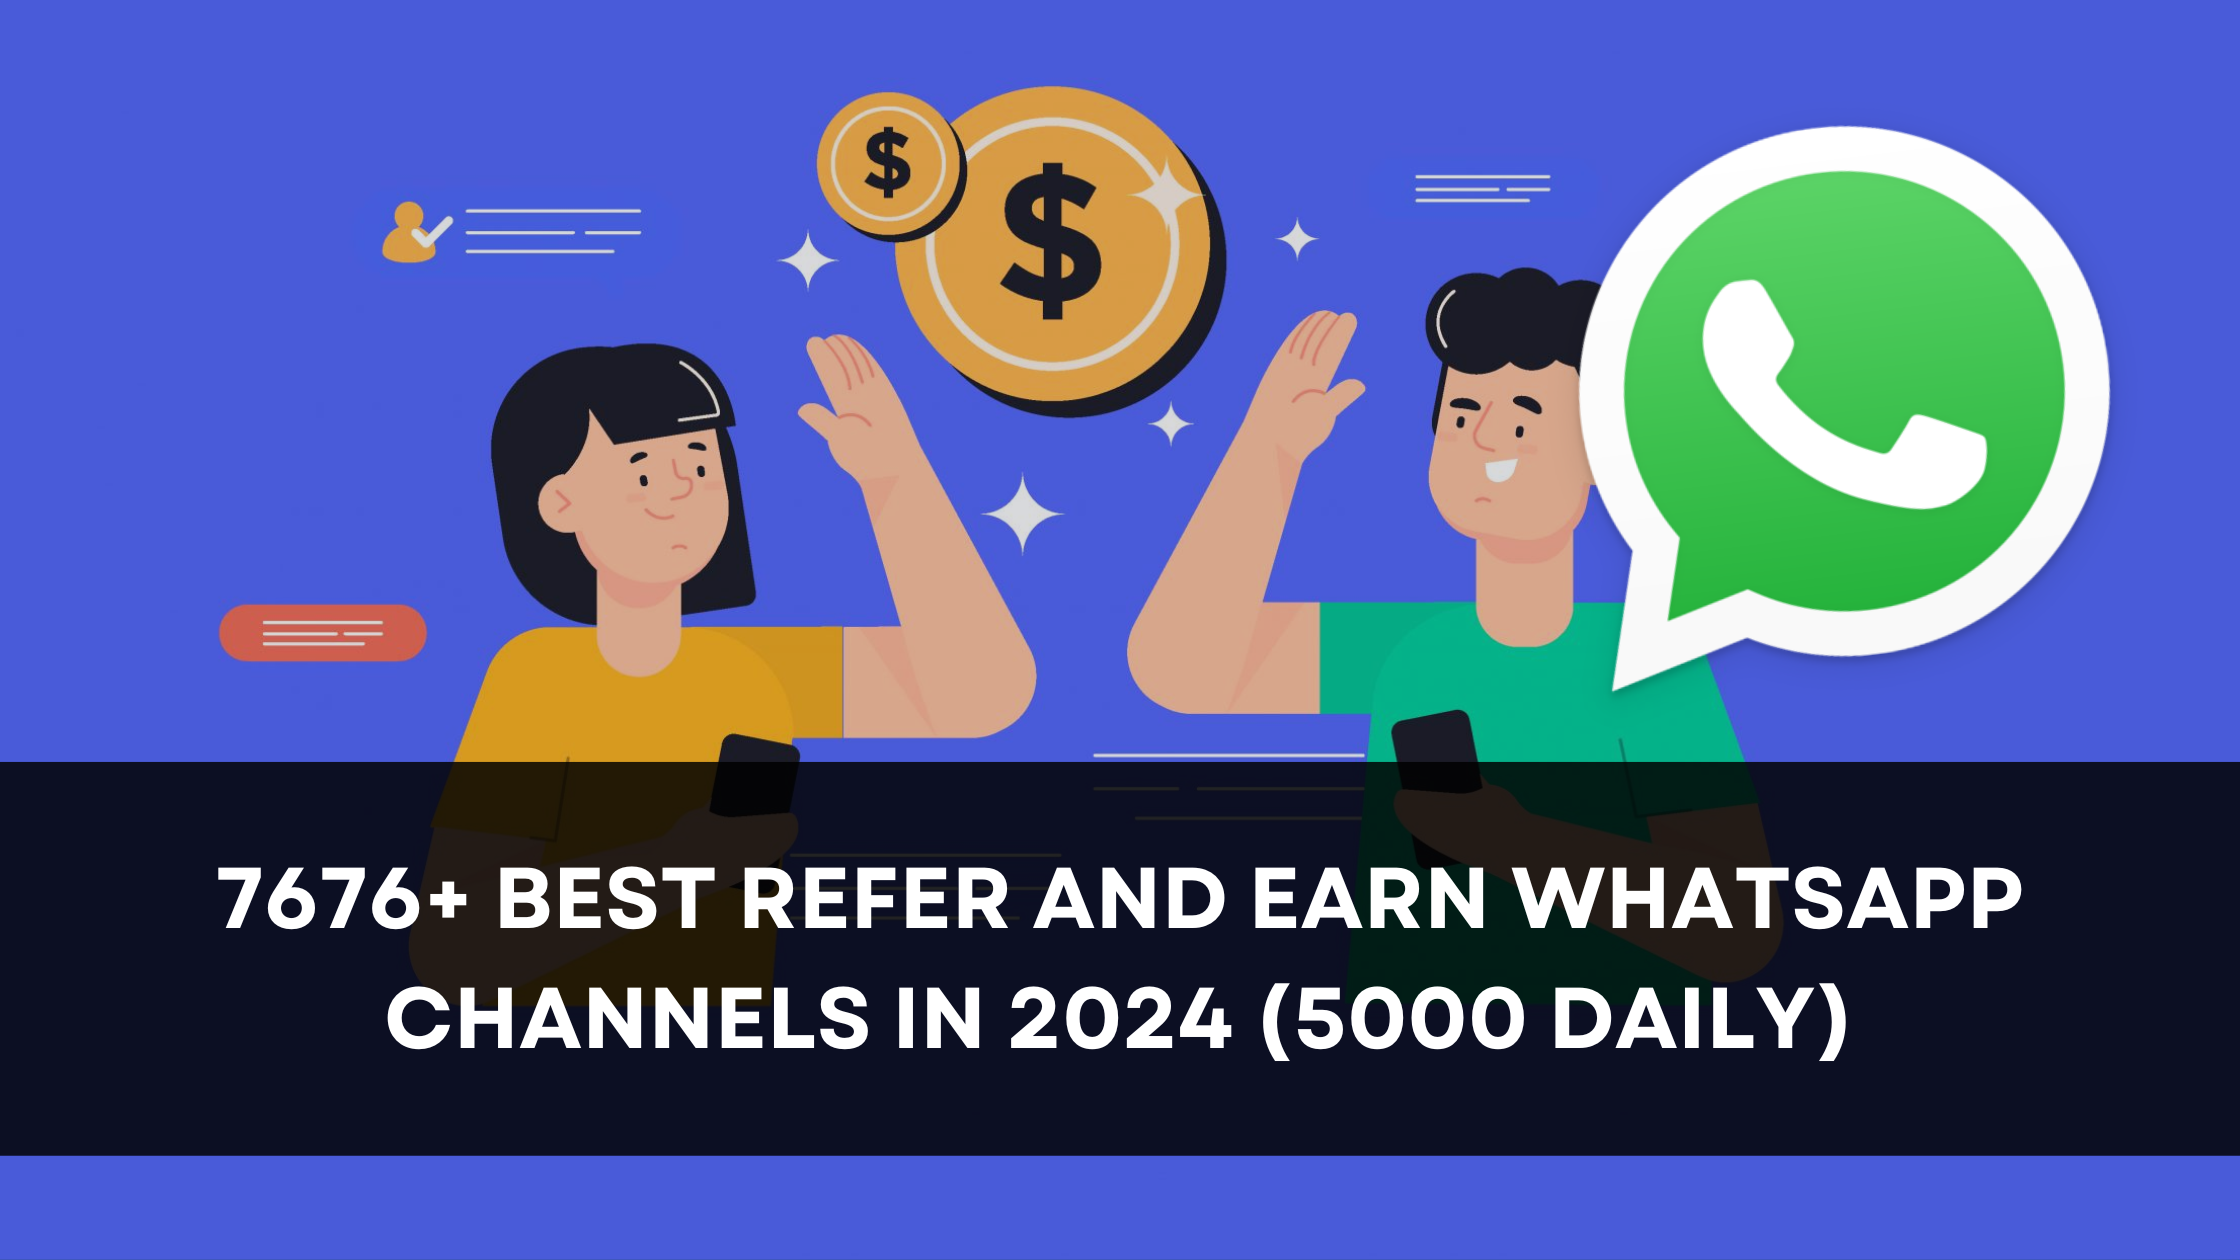 7676+ Best Refer and Earn WhatsApp Channels in 2024 (5000 Daily)